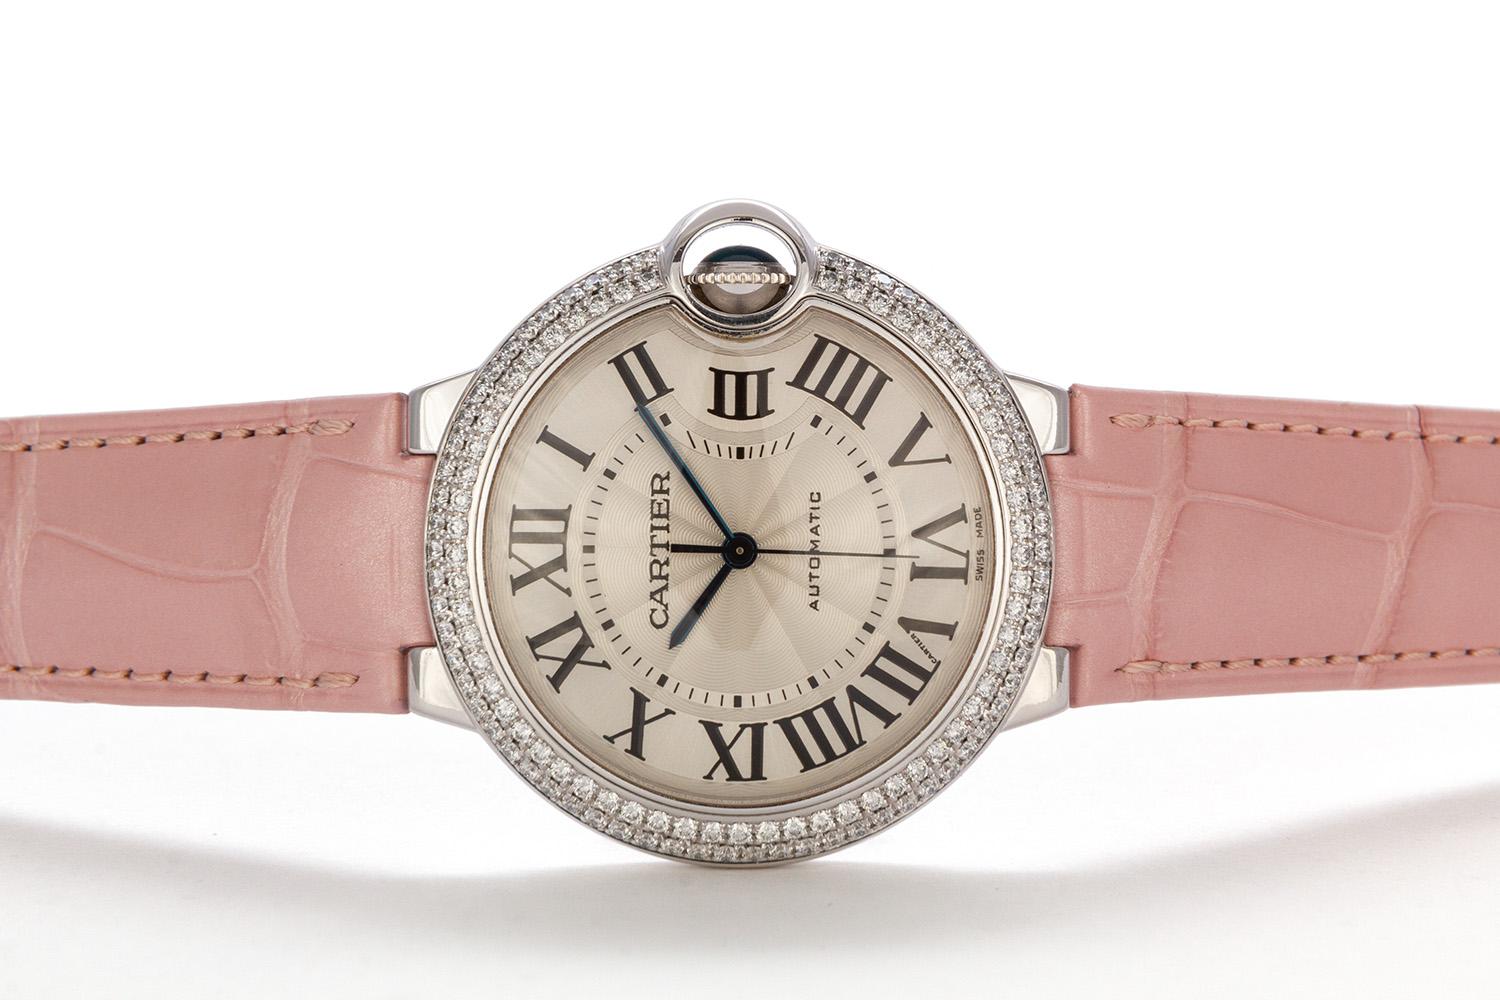 We are pleased to offer this Authentic Cartier 18k White & Diamond Medium Size Ballon Bleu Automatic Watch. This Ballon Bleu de Cartier watch (ref. WE900651) features a BRAND NEW Cartier pink alligator strap with the original Cartier 18k white gold